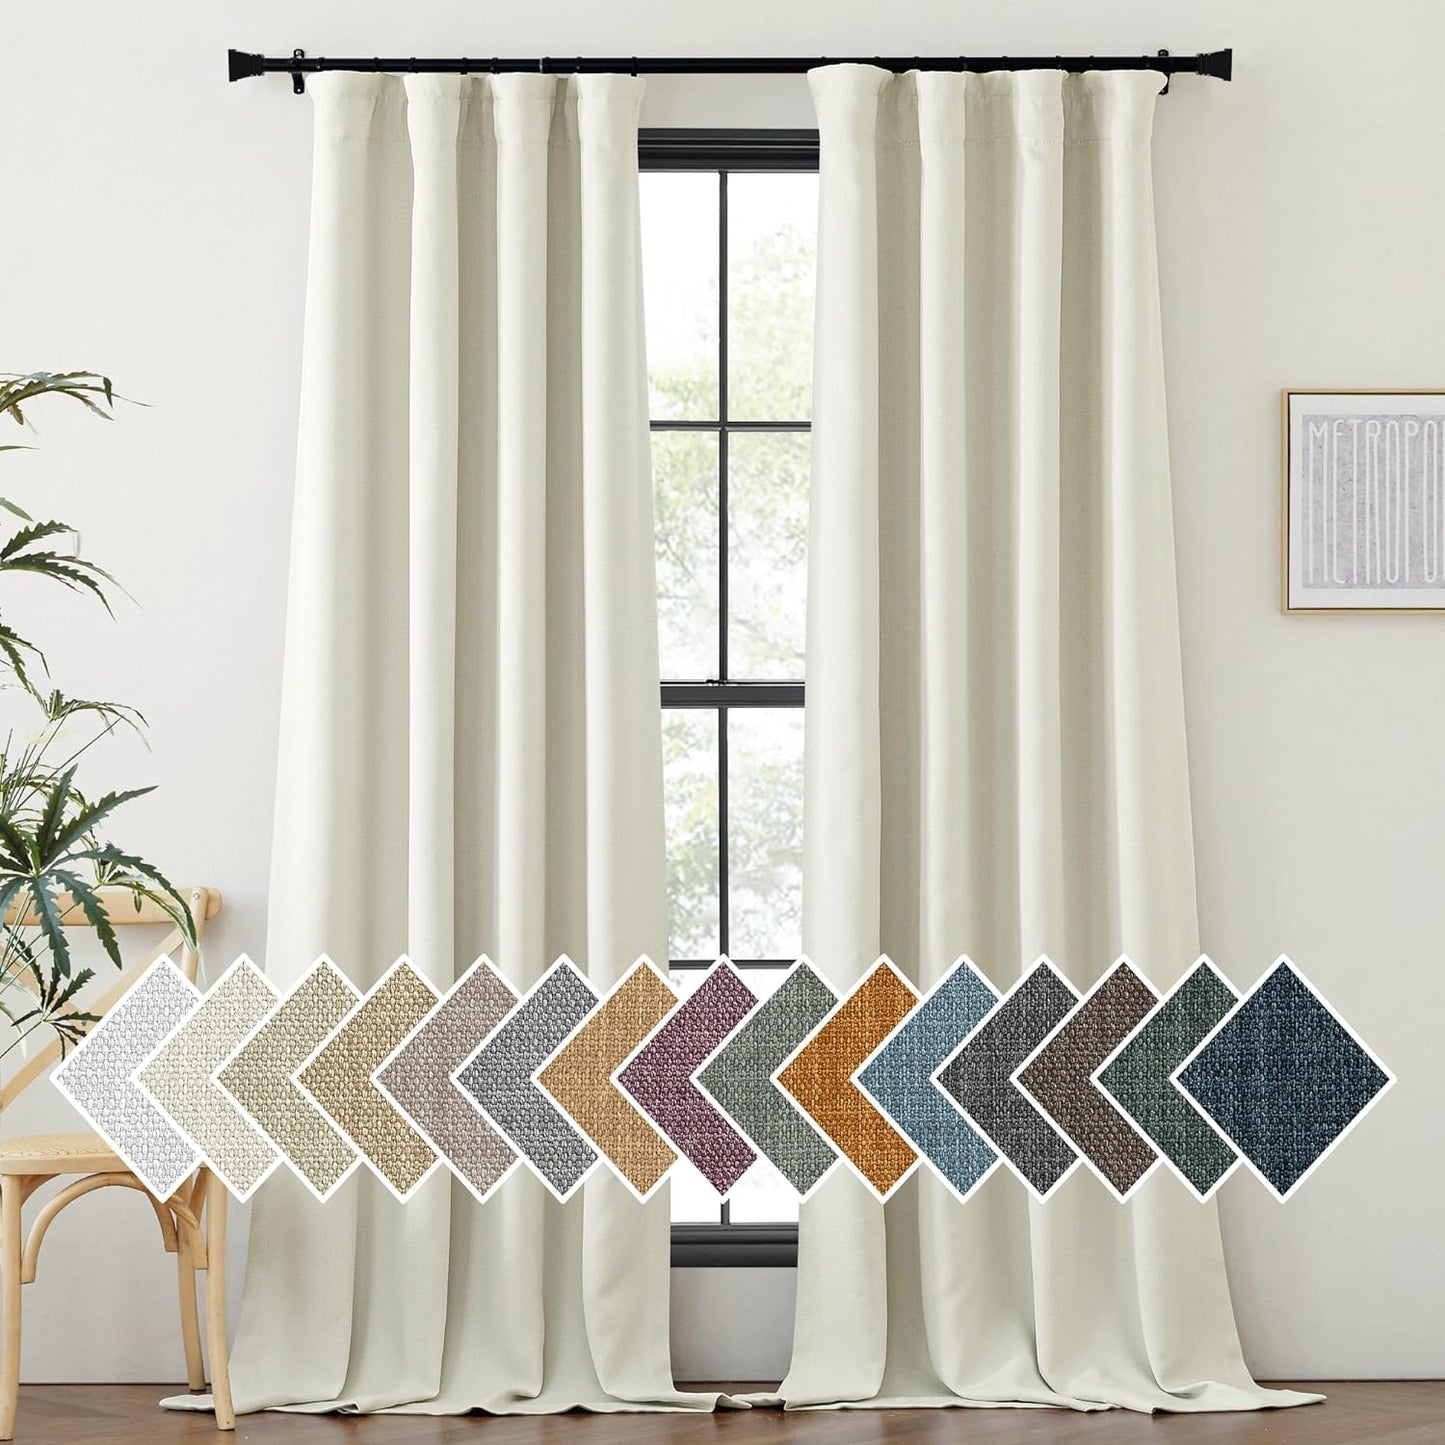 NICETOWN Faux Linen Room Darkening Curtains & Drapes for Living Room, Dual Rod Pockets & Hook Belt Heat/Light Blocking Window Treatments Thermal Drapes for Bedroom, Angora, W52 X L84, 2 Panels  NICETOWN Natural W52 X L102 